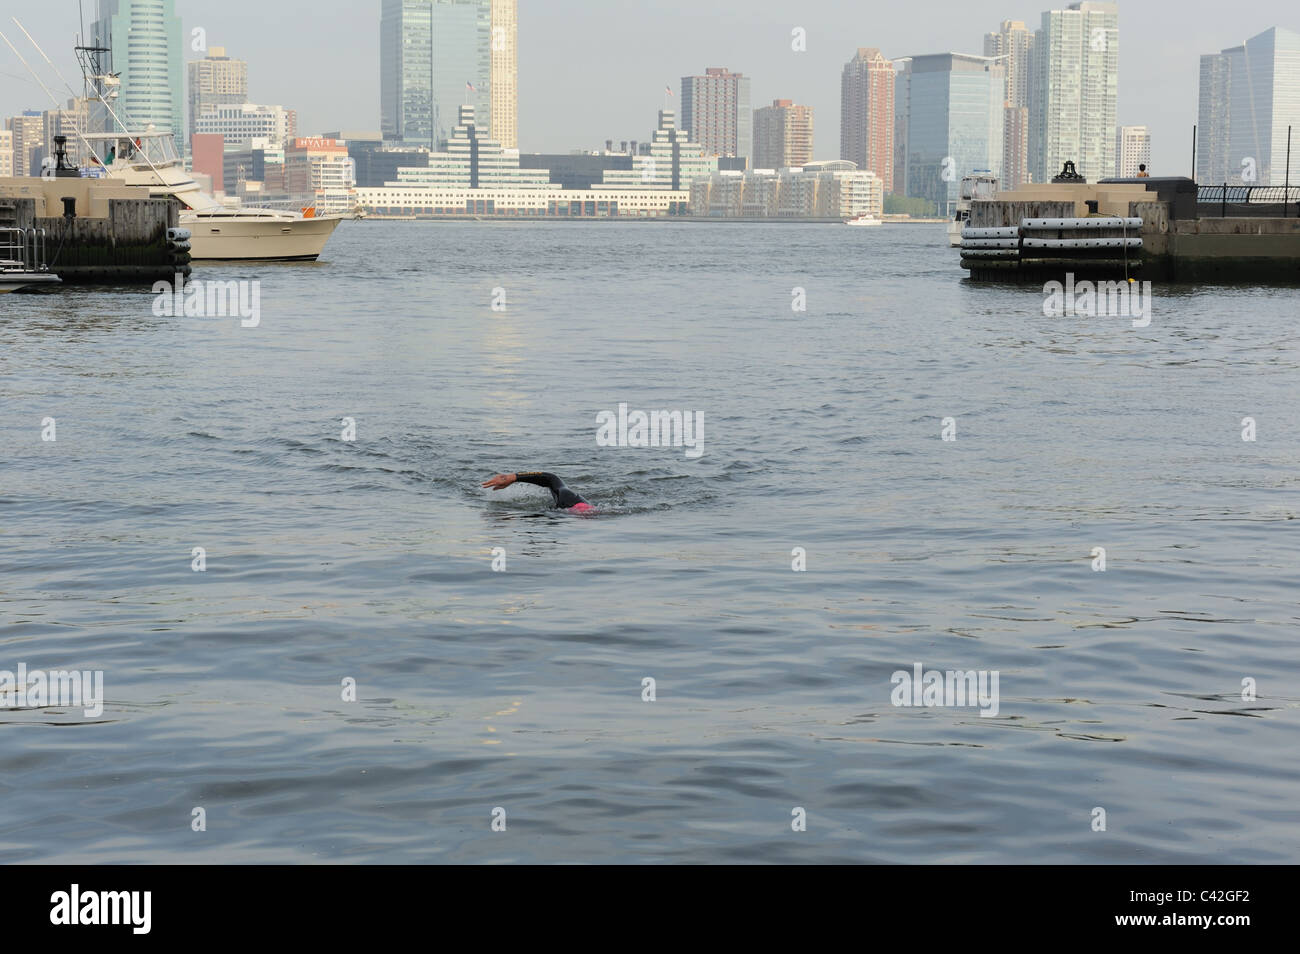 A swimmer in Manhattan's North Cove Marina, approaching the finish line of the annual 1.6 mile Great Hudson River Swim. Stock Photo